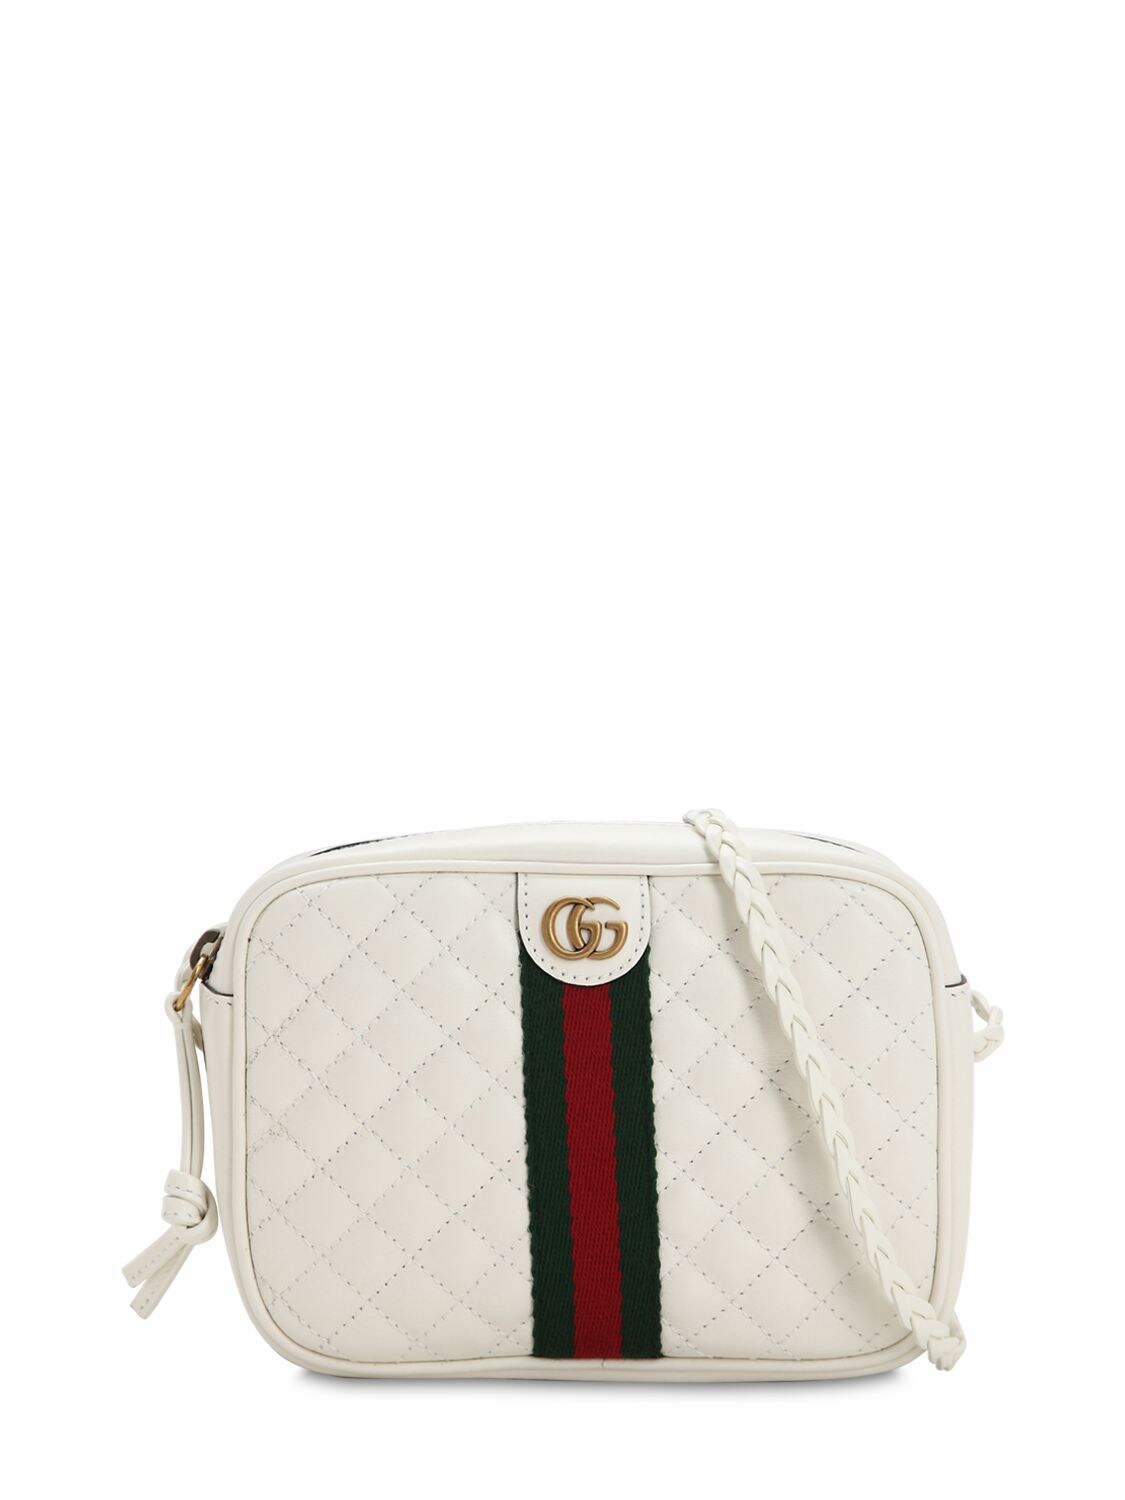 GUCCI MINI QUILTED LEATHER SHOULDER BAG,69IIJS033-OTE4MA2